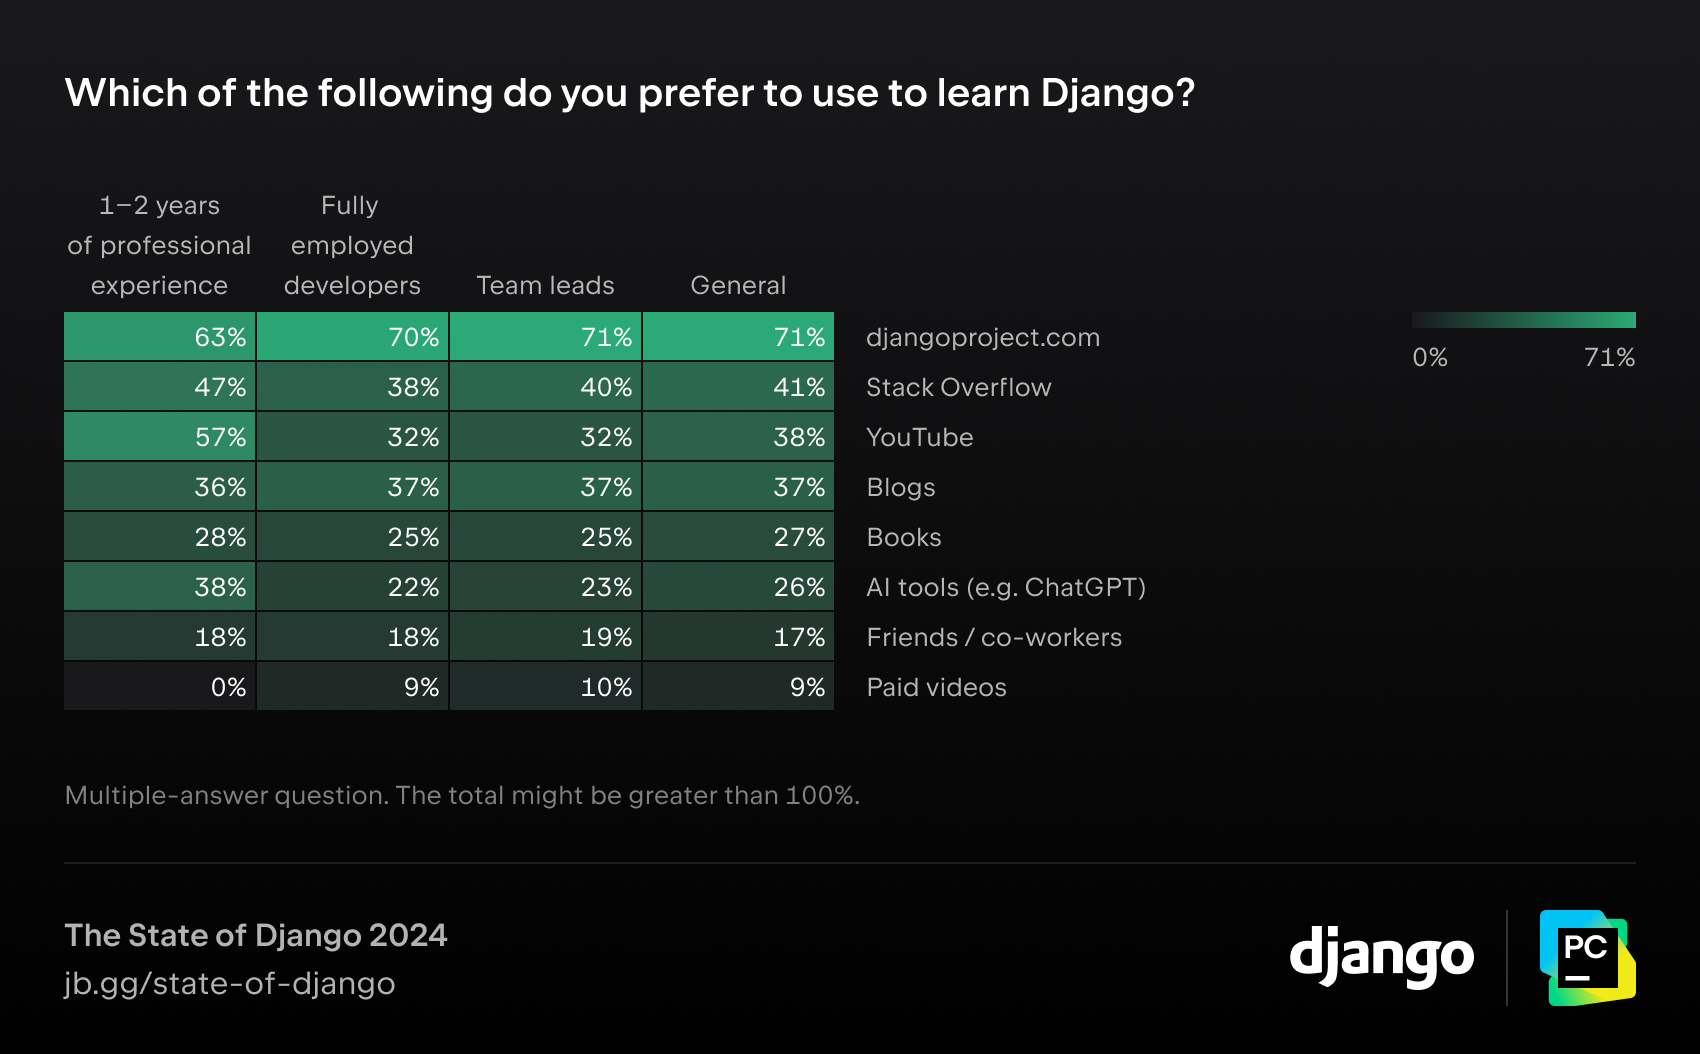 Which of the following do you prefer to use to learn Django?